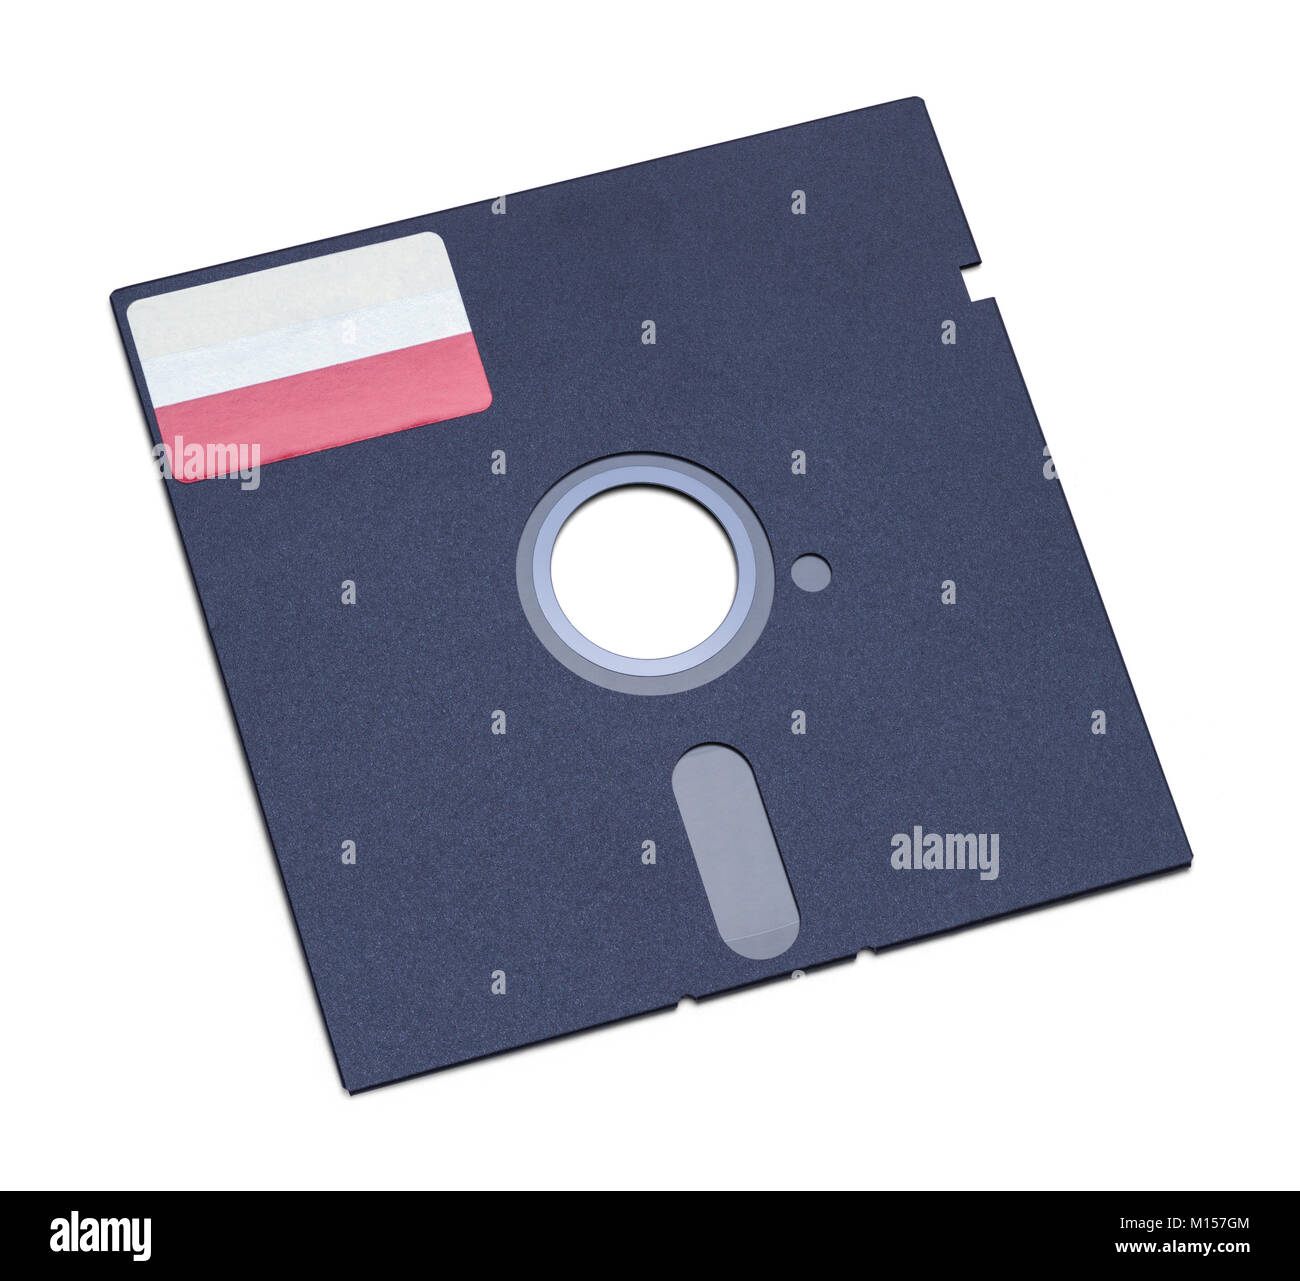 Old Vintage Computer Floppy Disc Isolated on White Background. Stock Photo